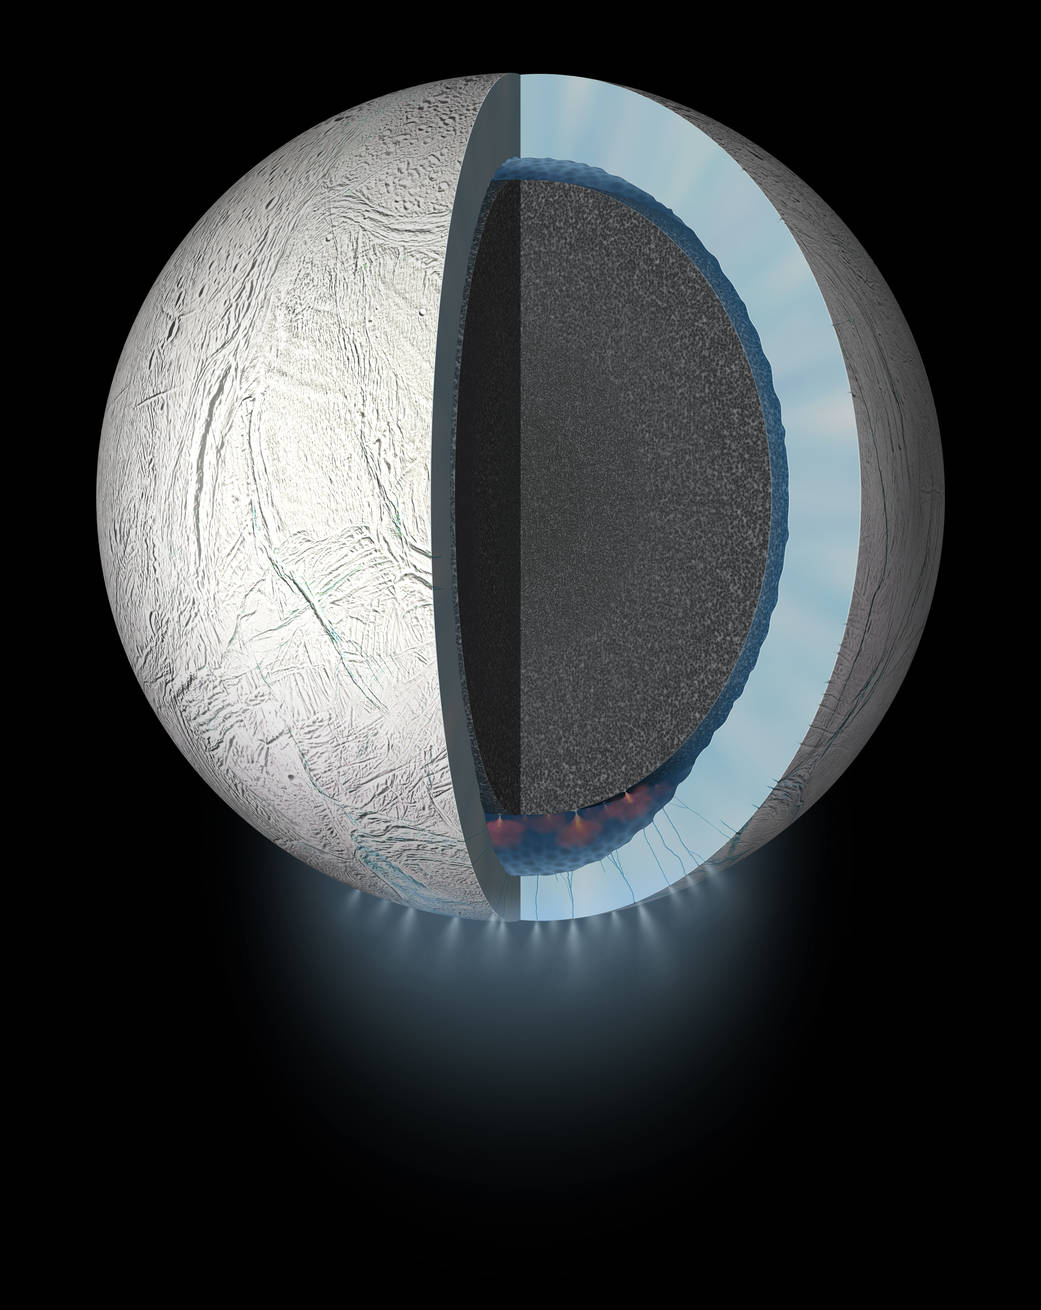 Artist’s rendering showing a cutaway view into the interior of Saturn’s moon EnceladuA